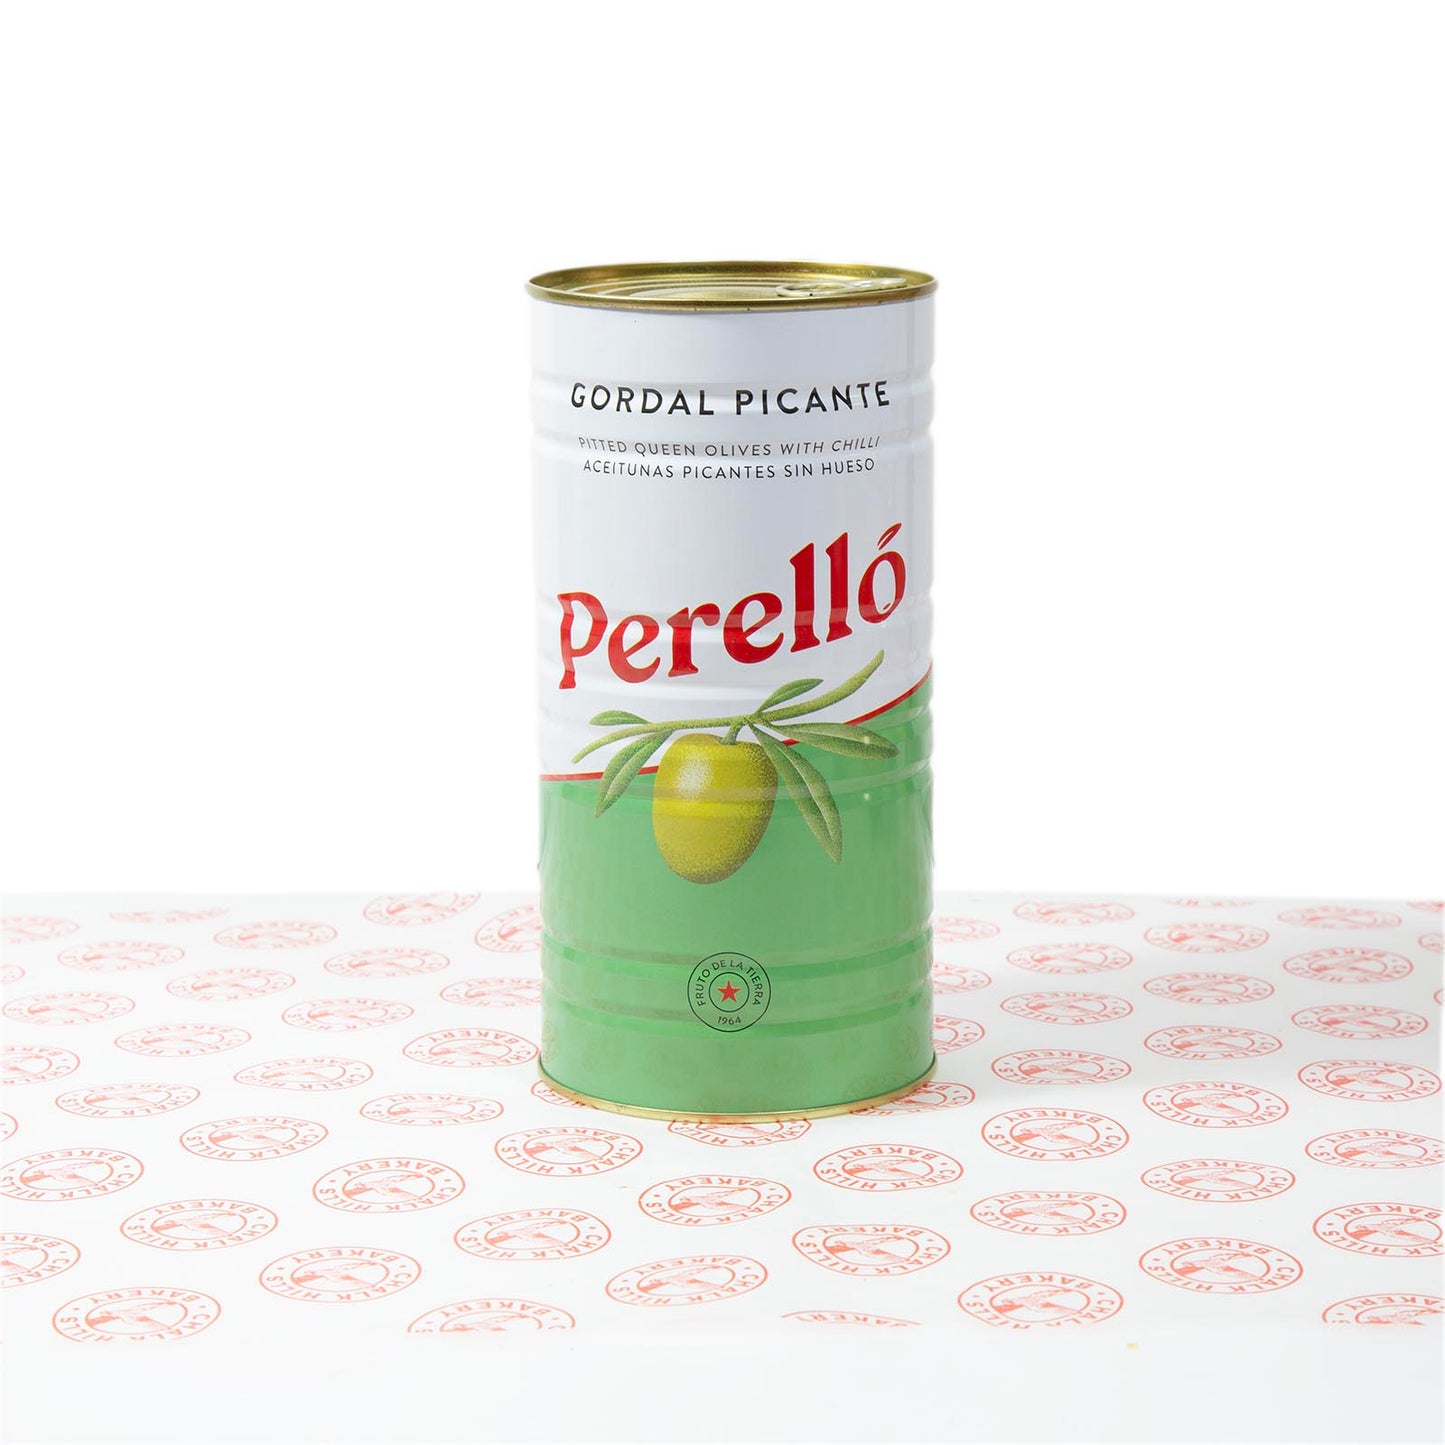 Perello Pitted Olives